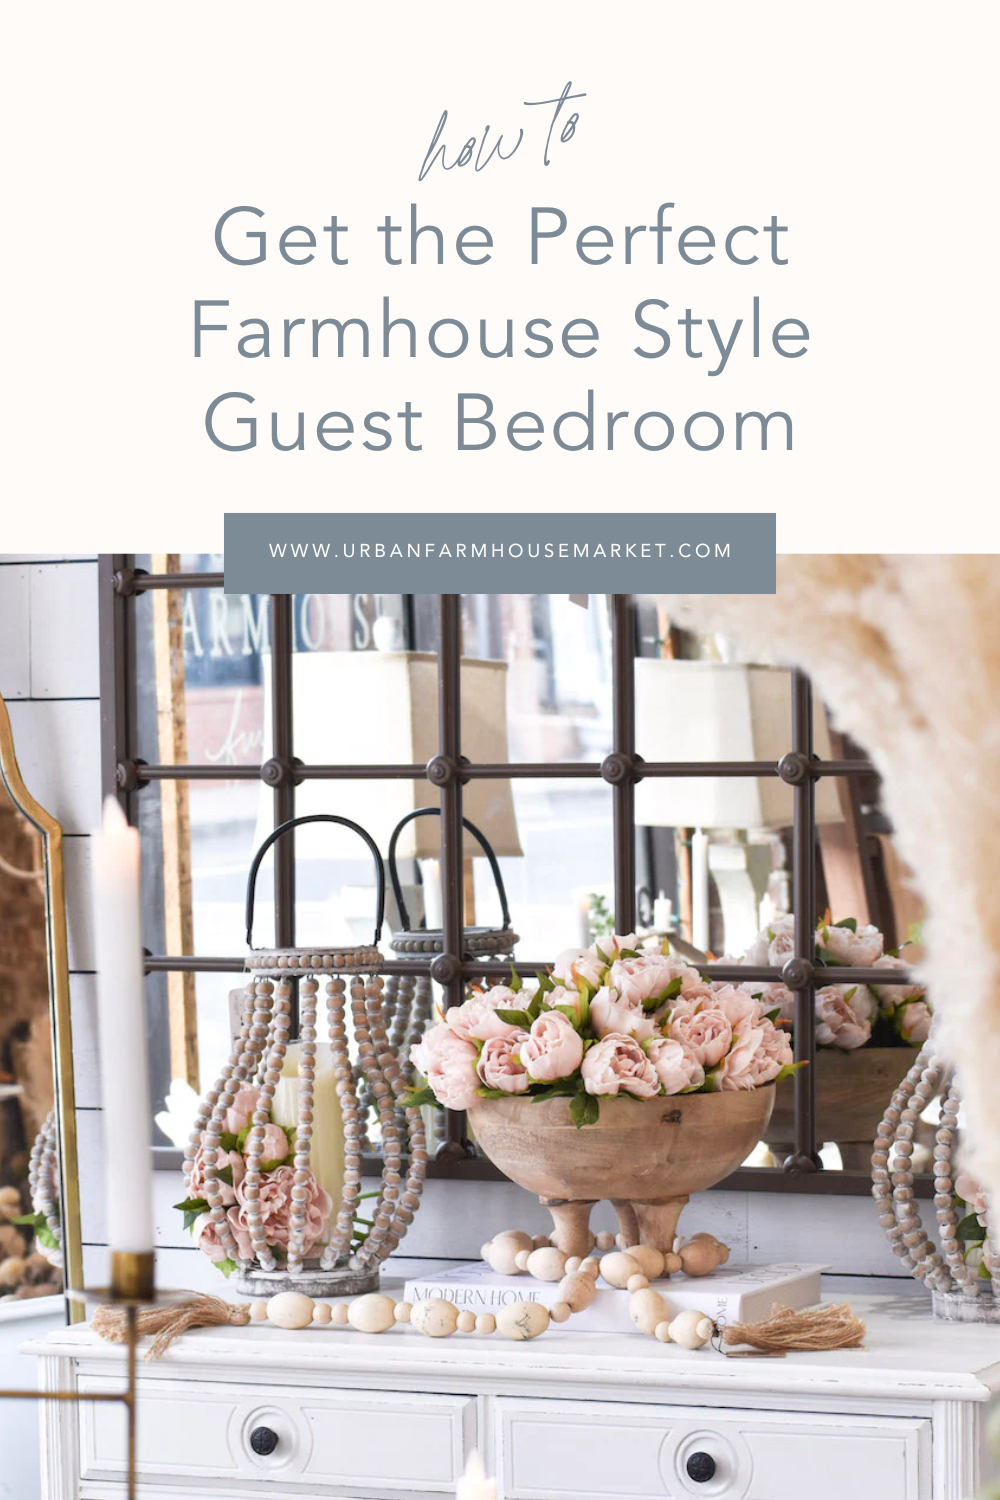 How to Get the Perfect Farmhouse Style Guest Bedroom